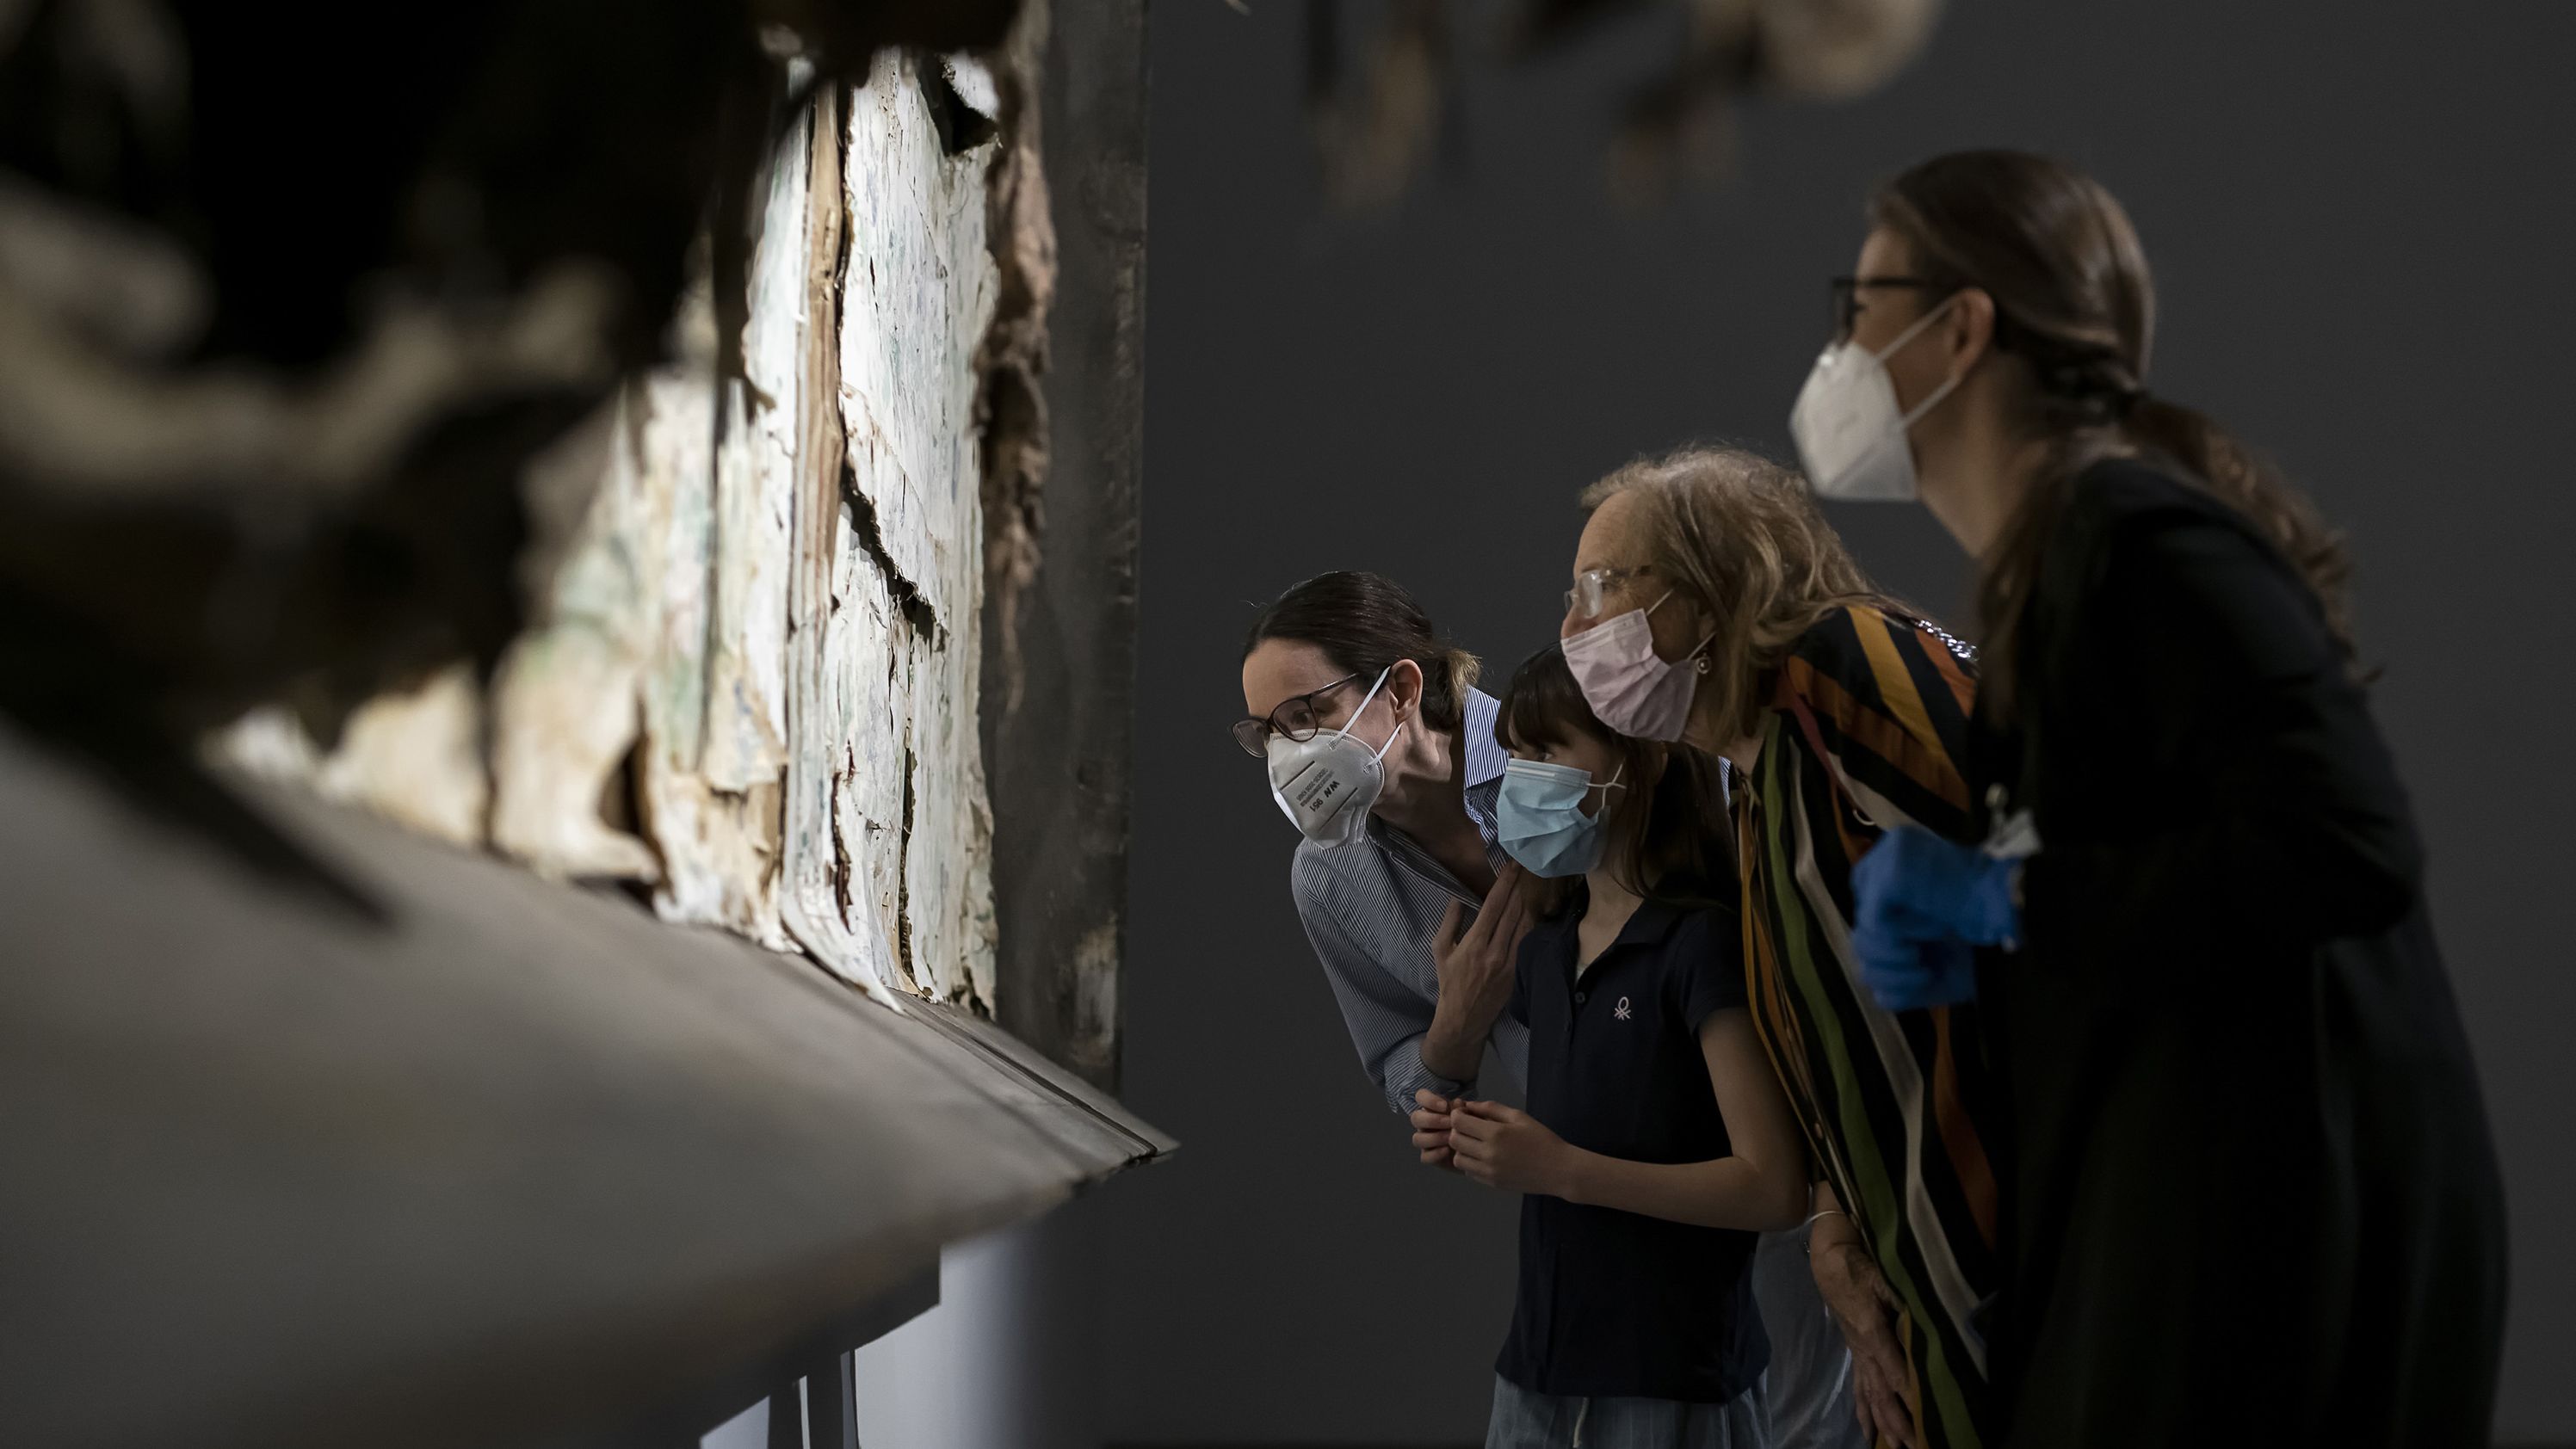 Visitors look at the work of artist Berlinde De Bruyckere at Fondazione Sandretto Re Rebaudengo, a contemporary art foundation in Turin, Italy, on May 23.   